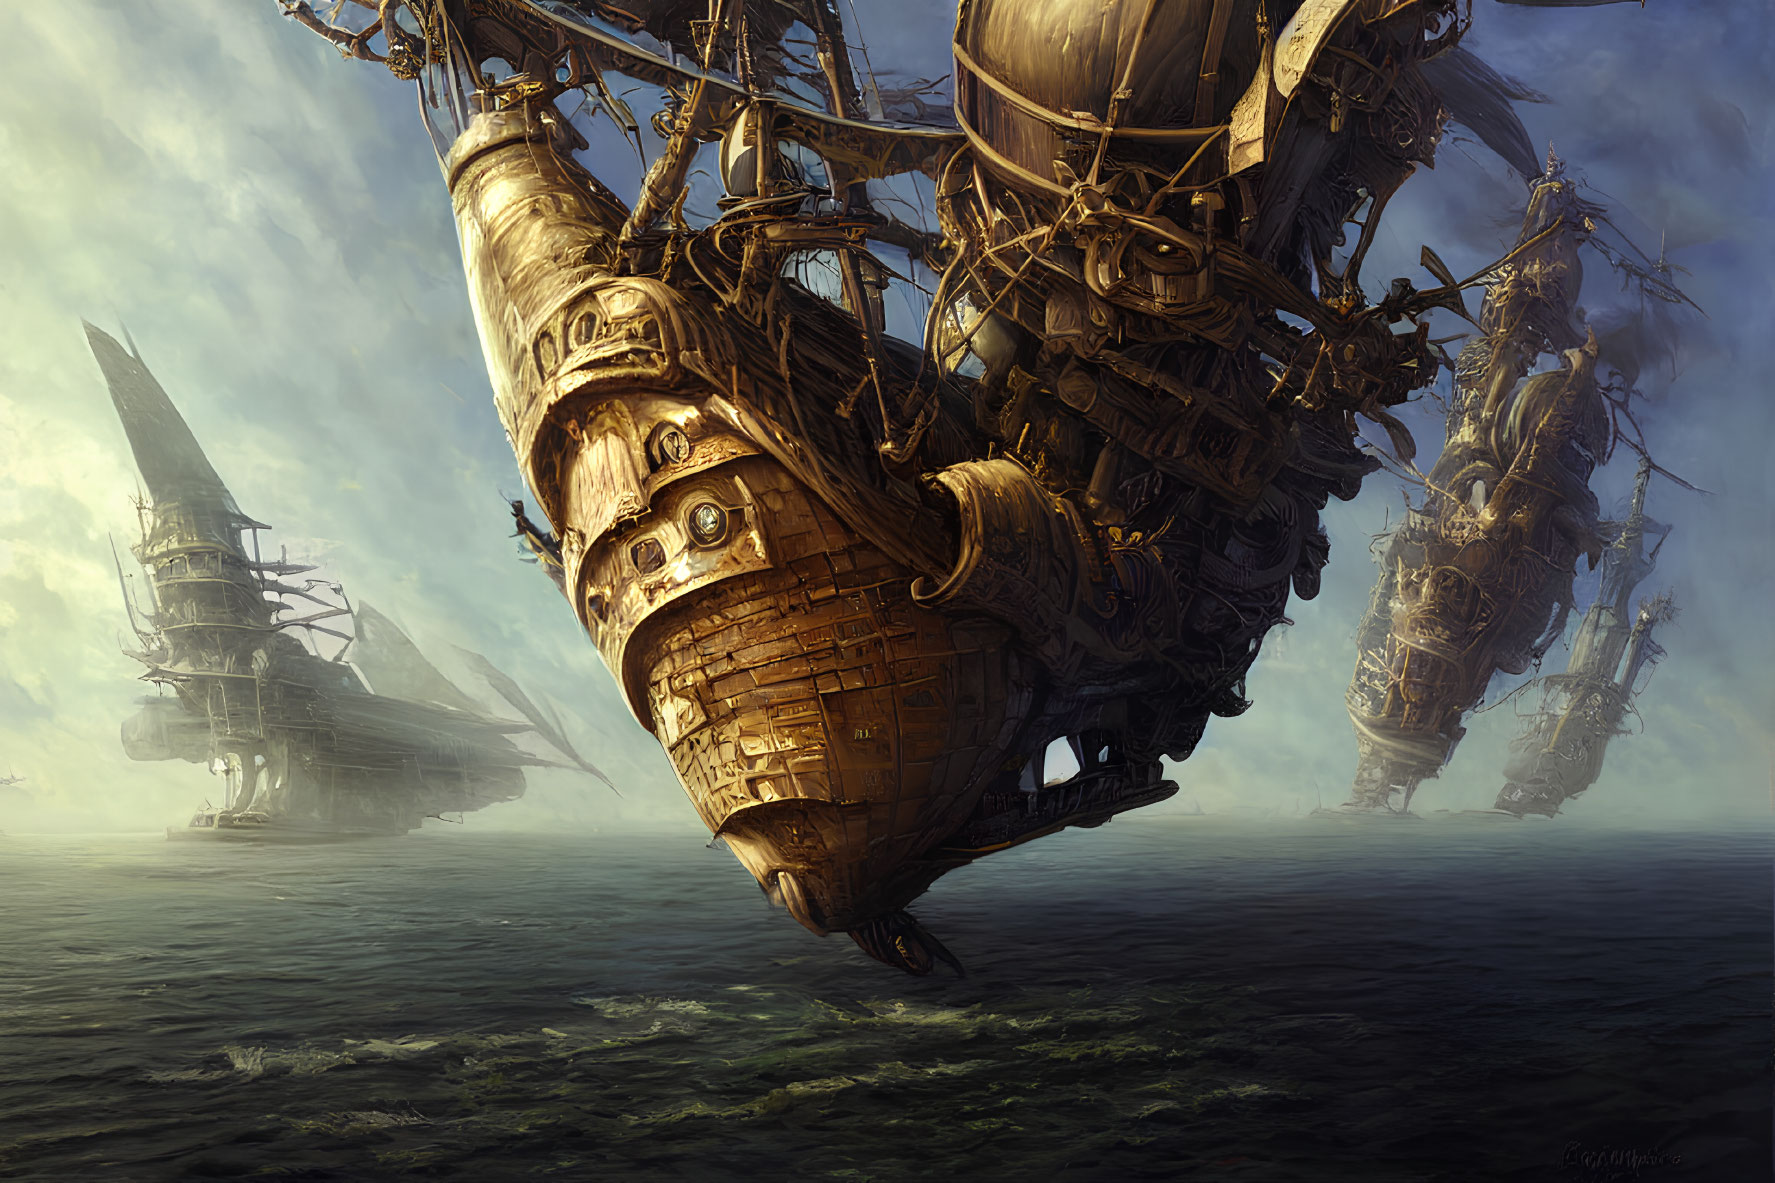 Intricately Designed Steampunk Airships Float Over Misty Sea